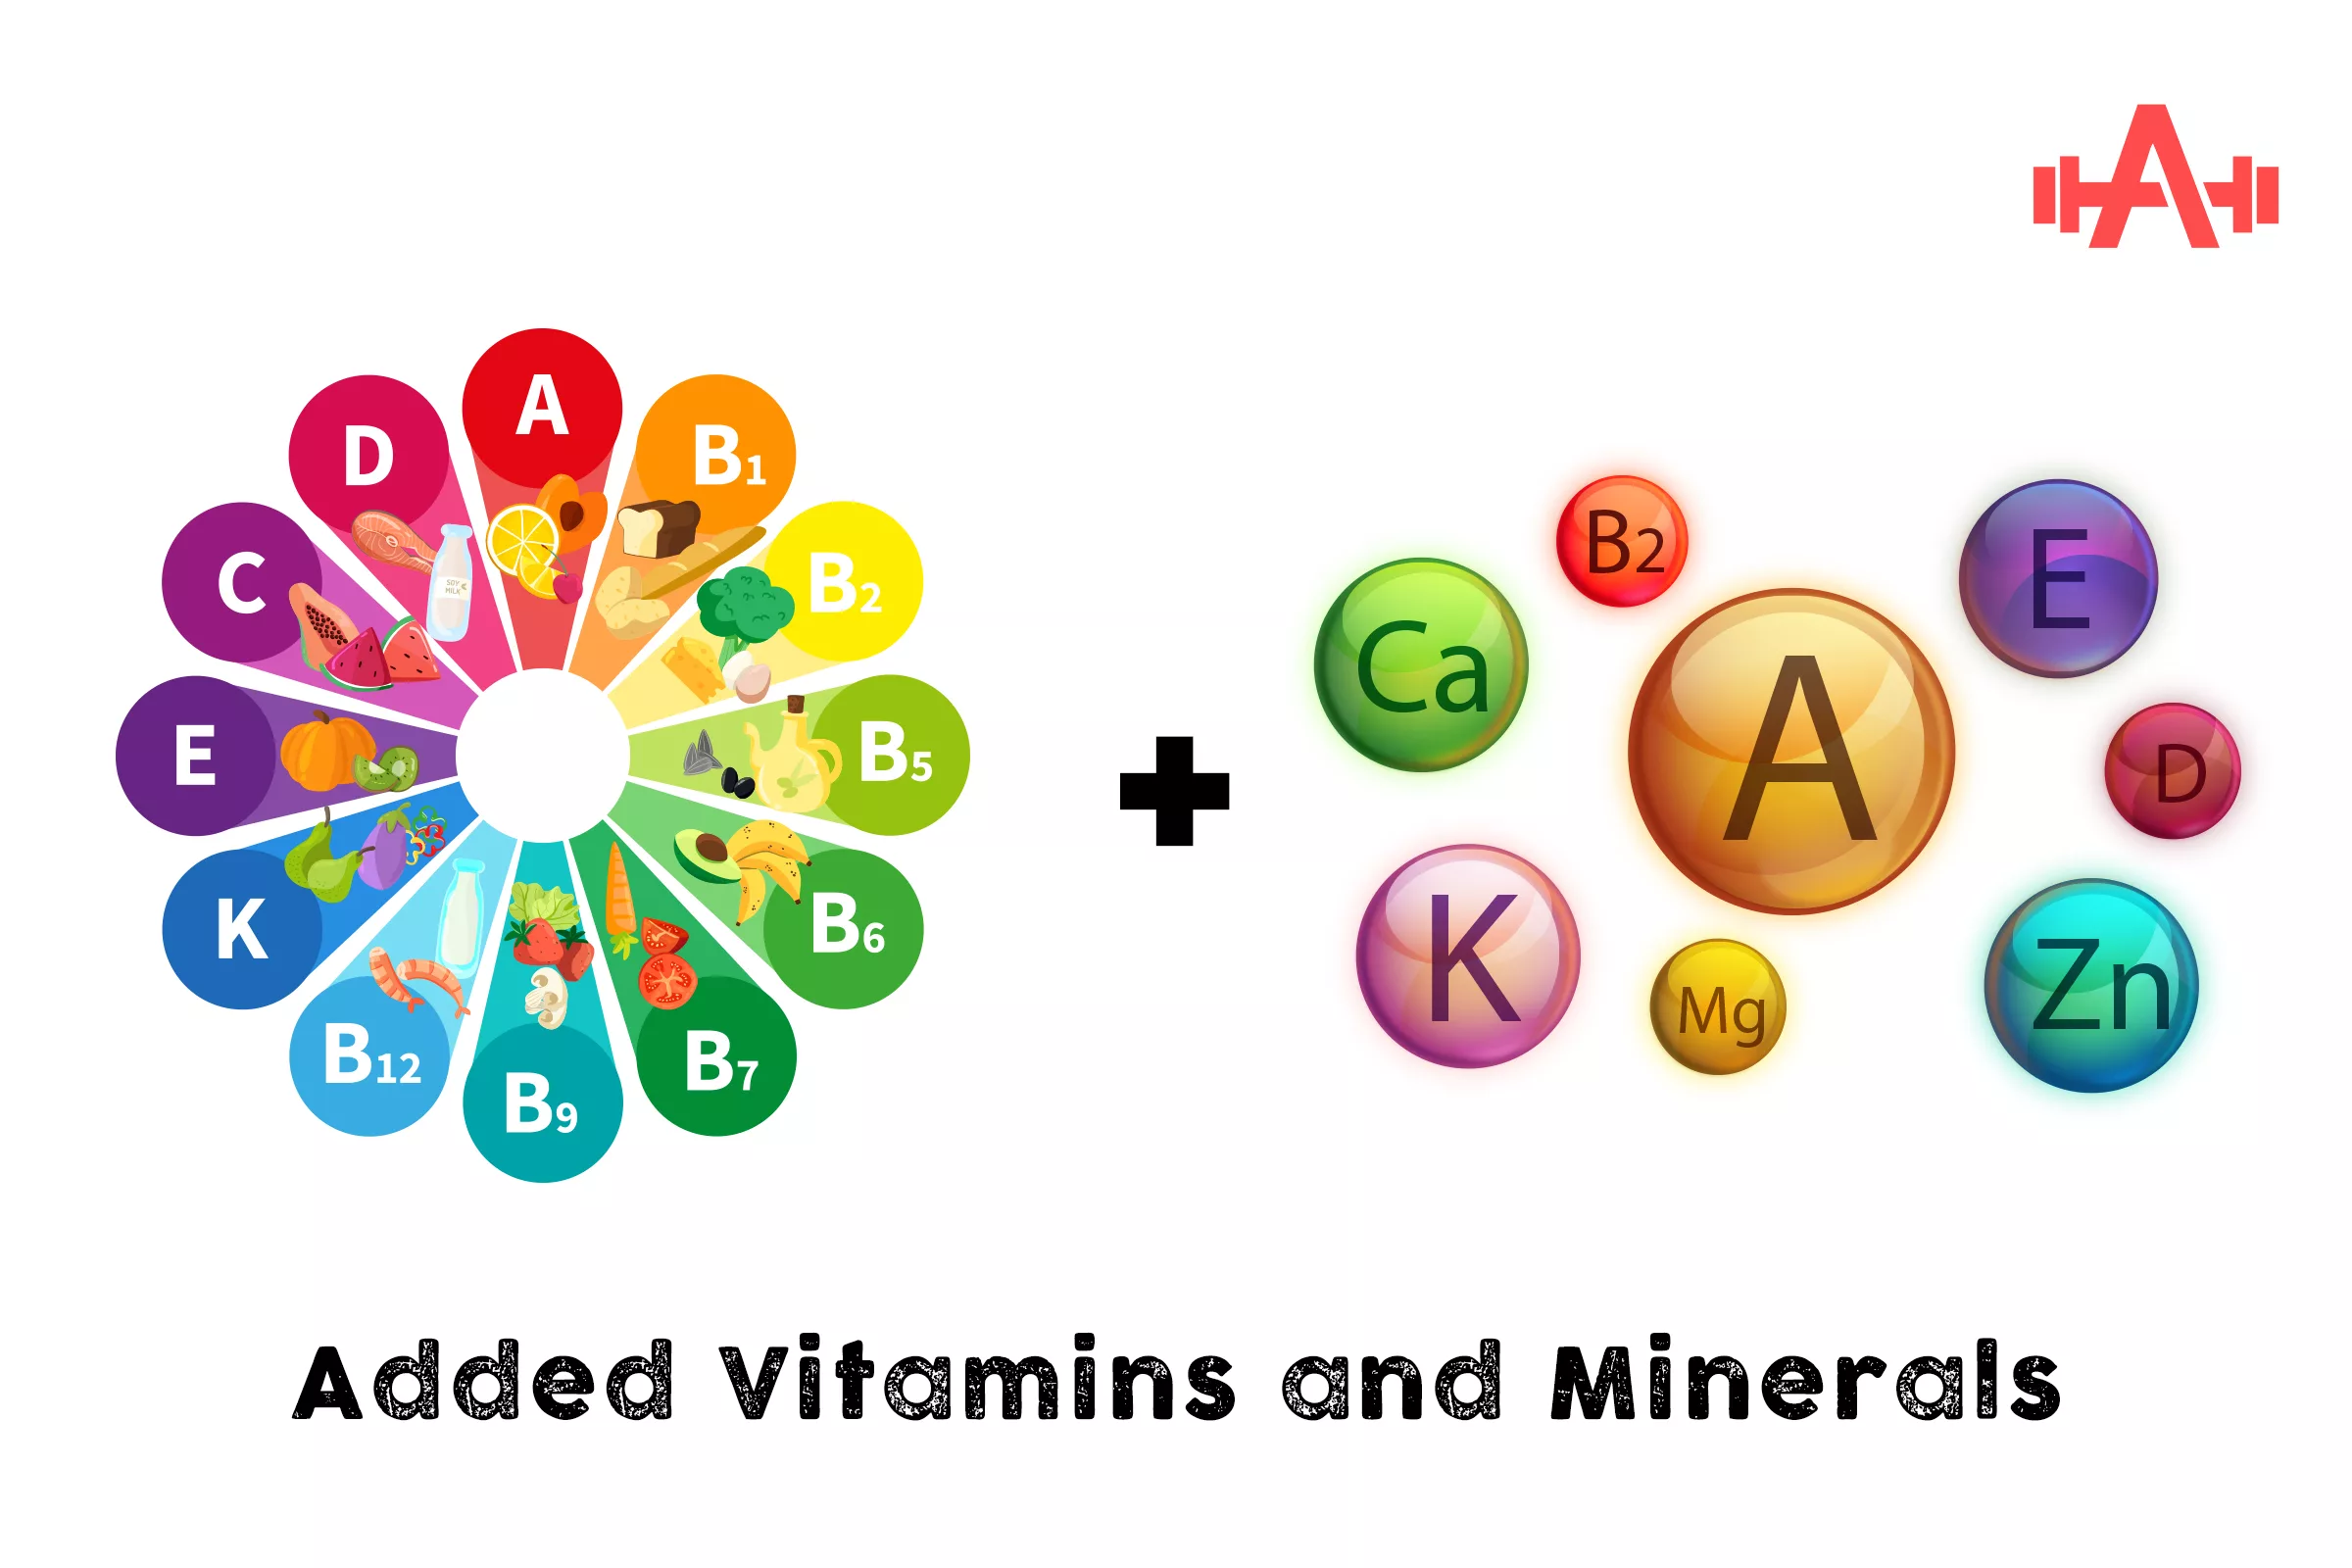 Added Vitamins and Minerals